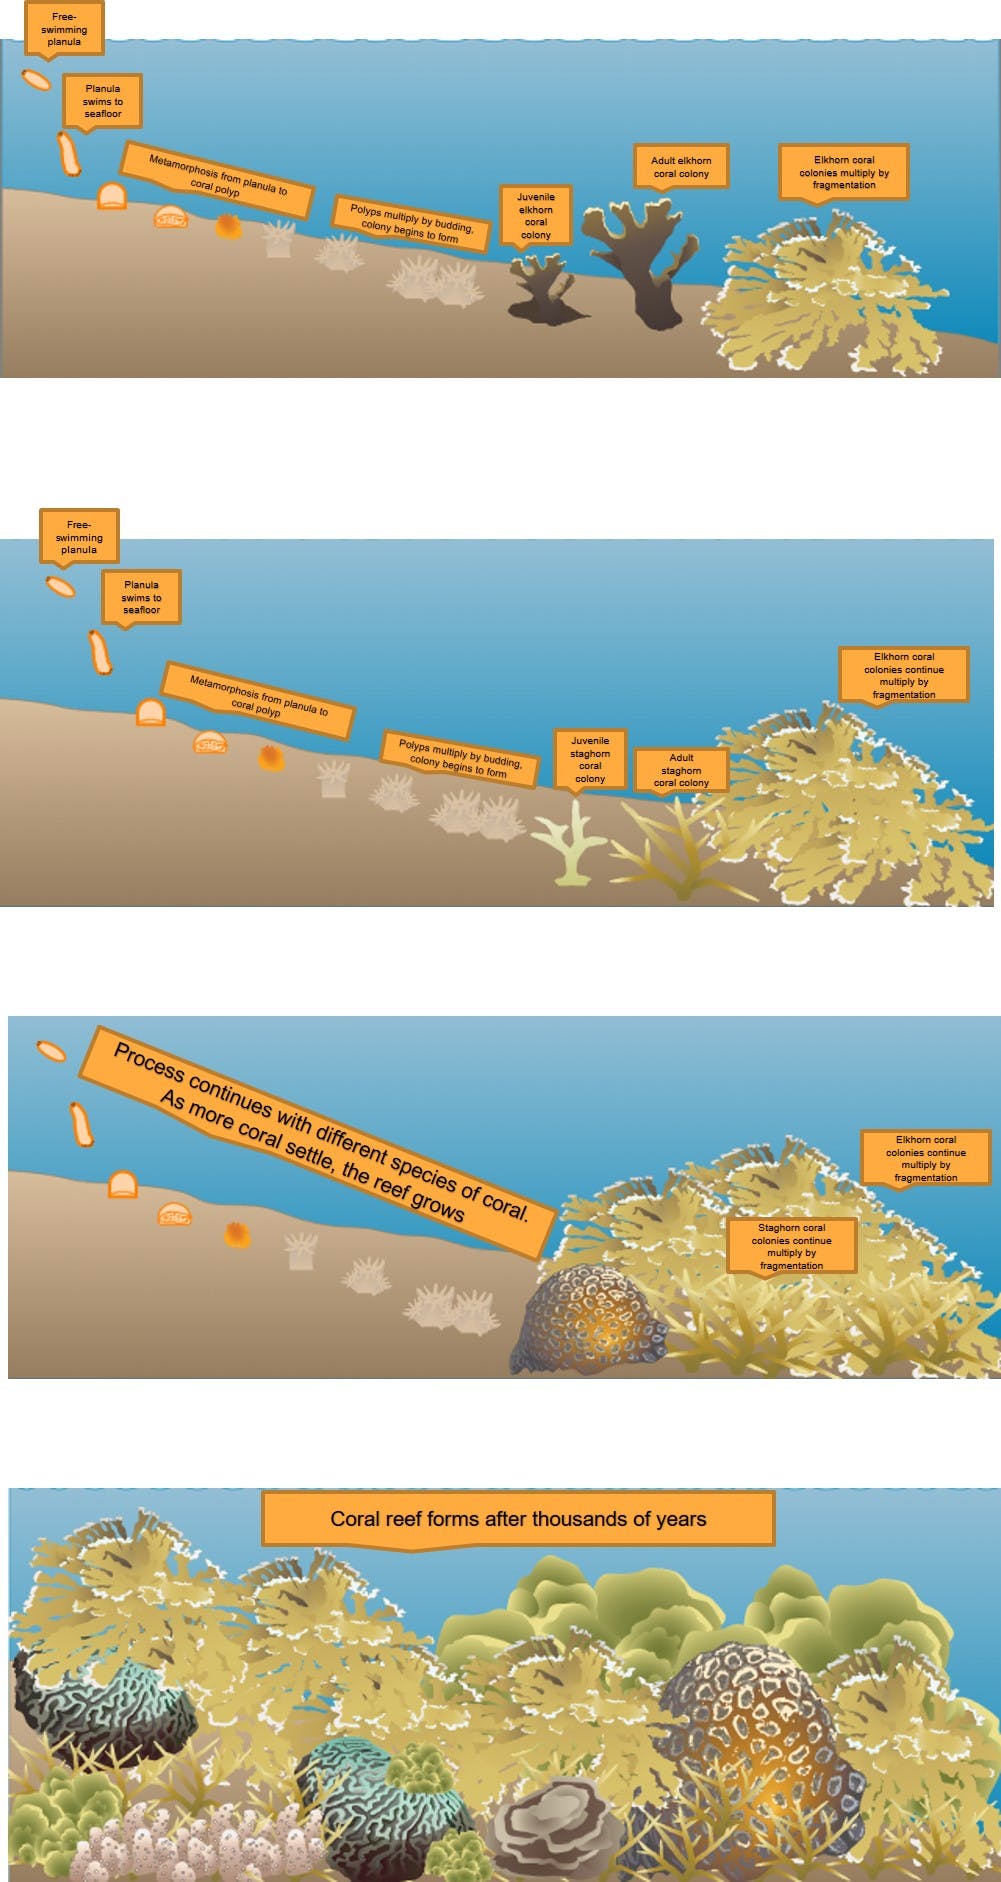 Here are the stages of the coral reef’s life cycle